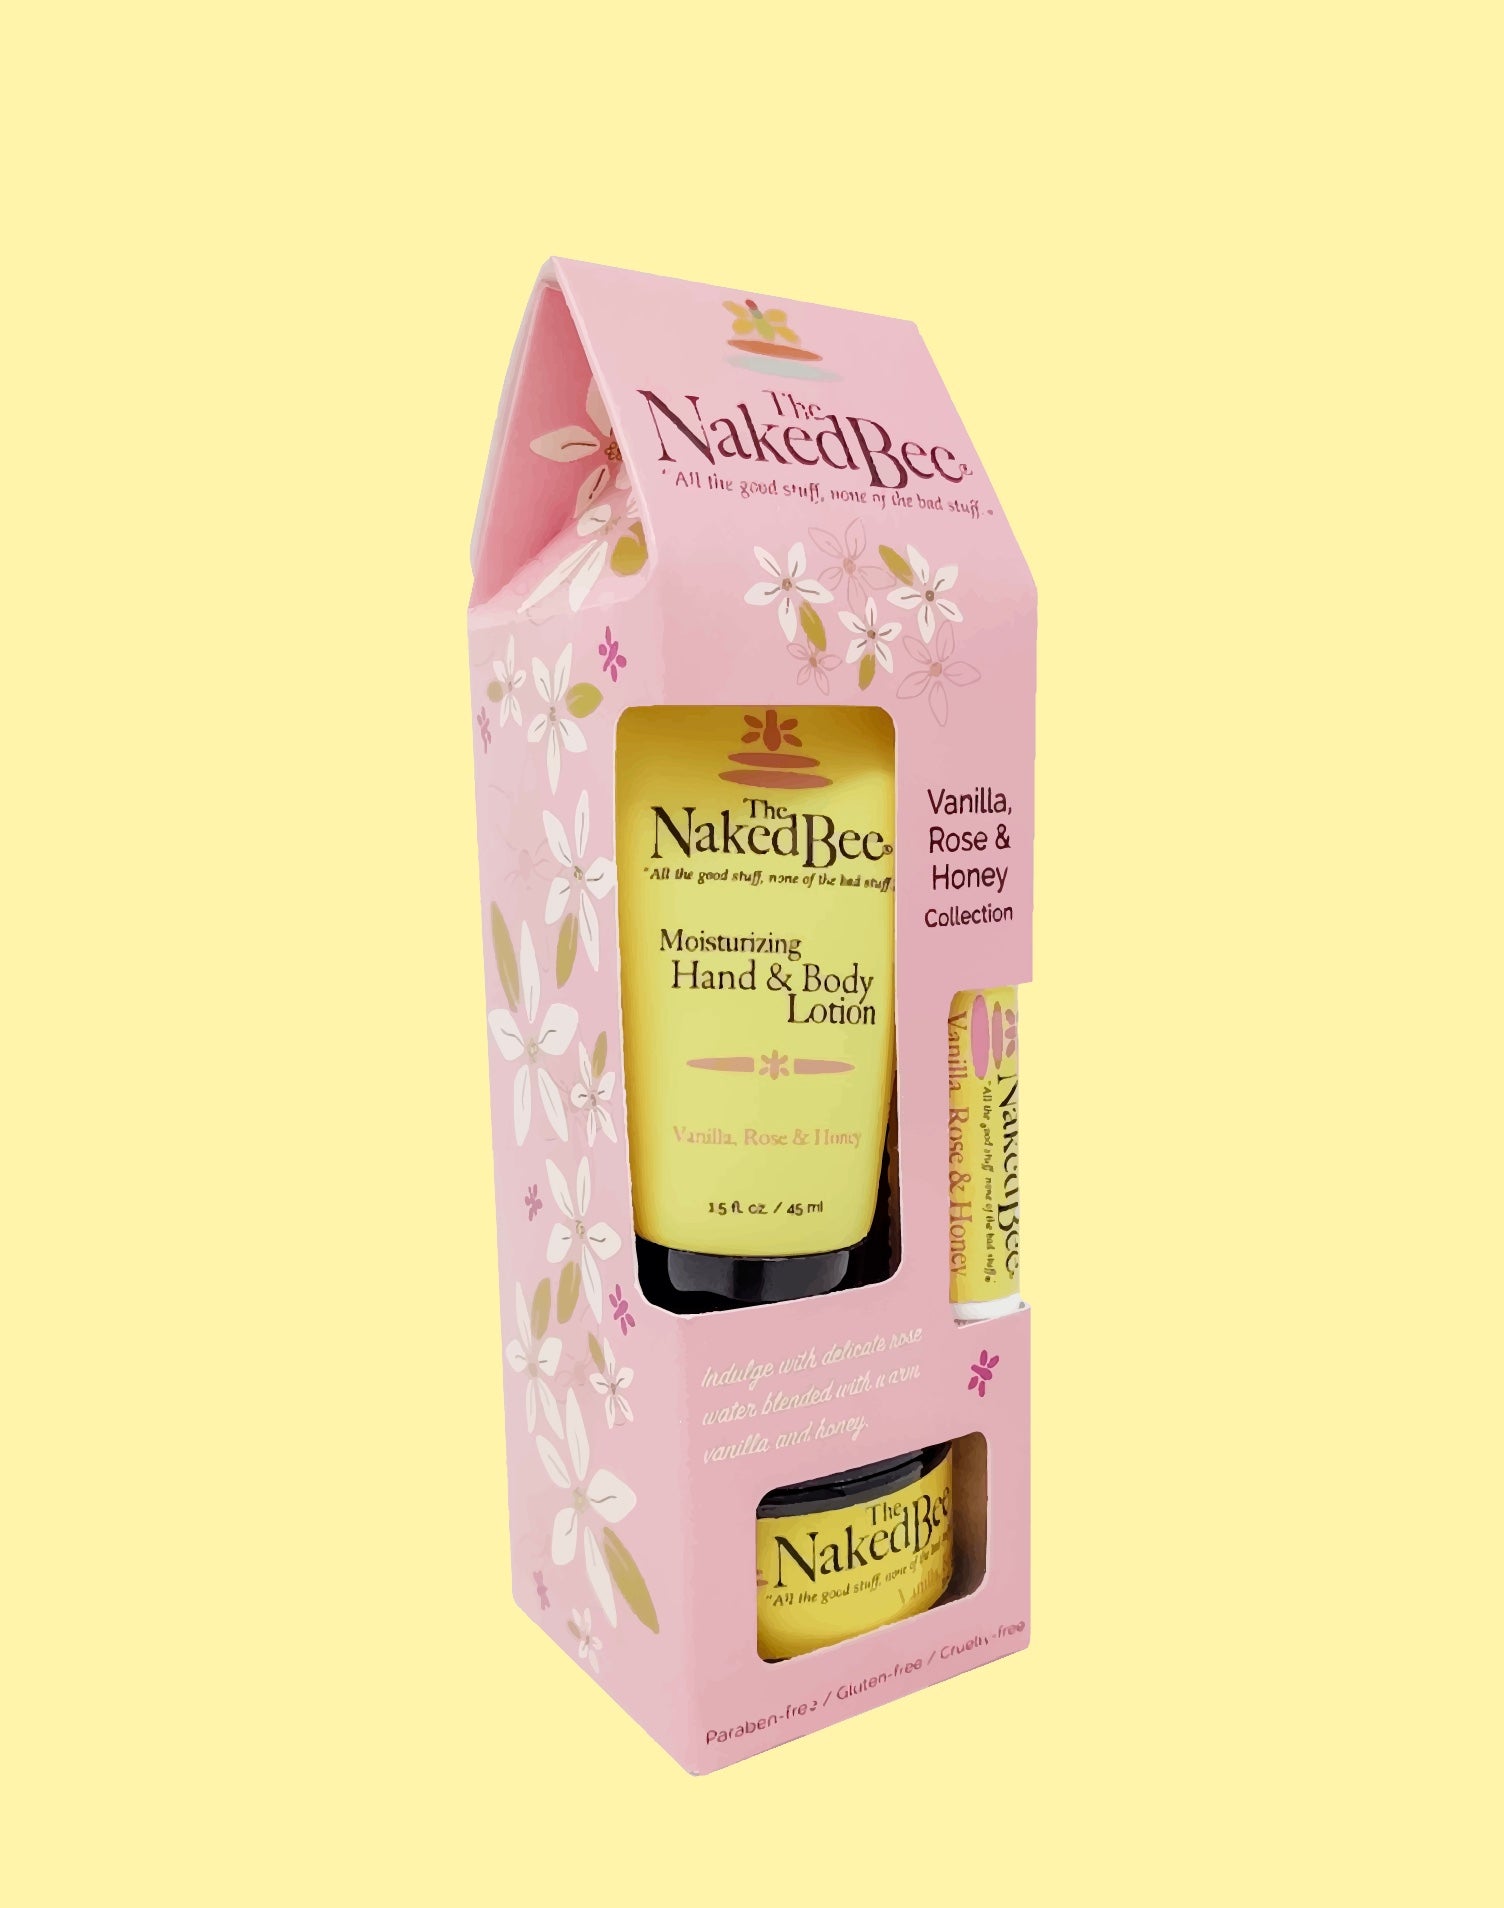 Naked Bee Vanilla Rose & Honey Gift Collection